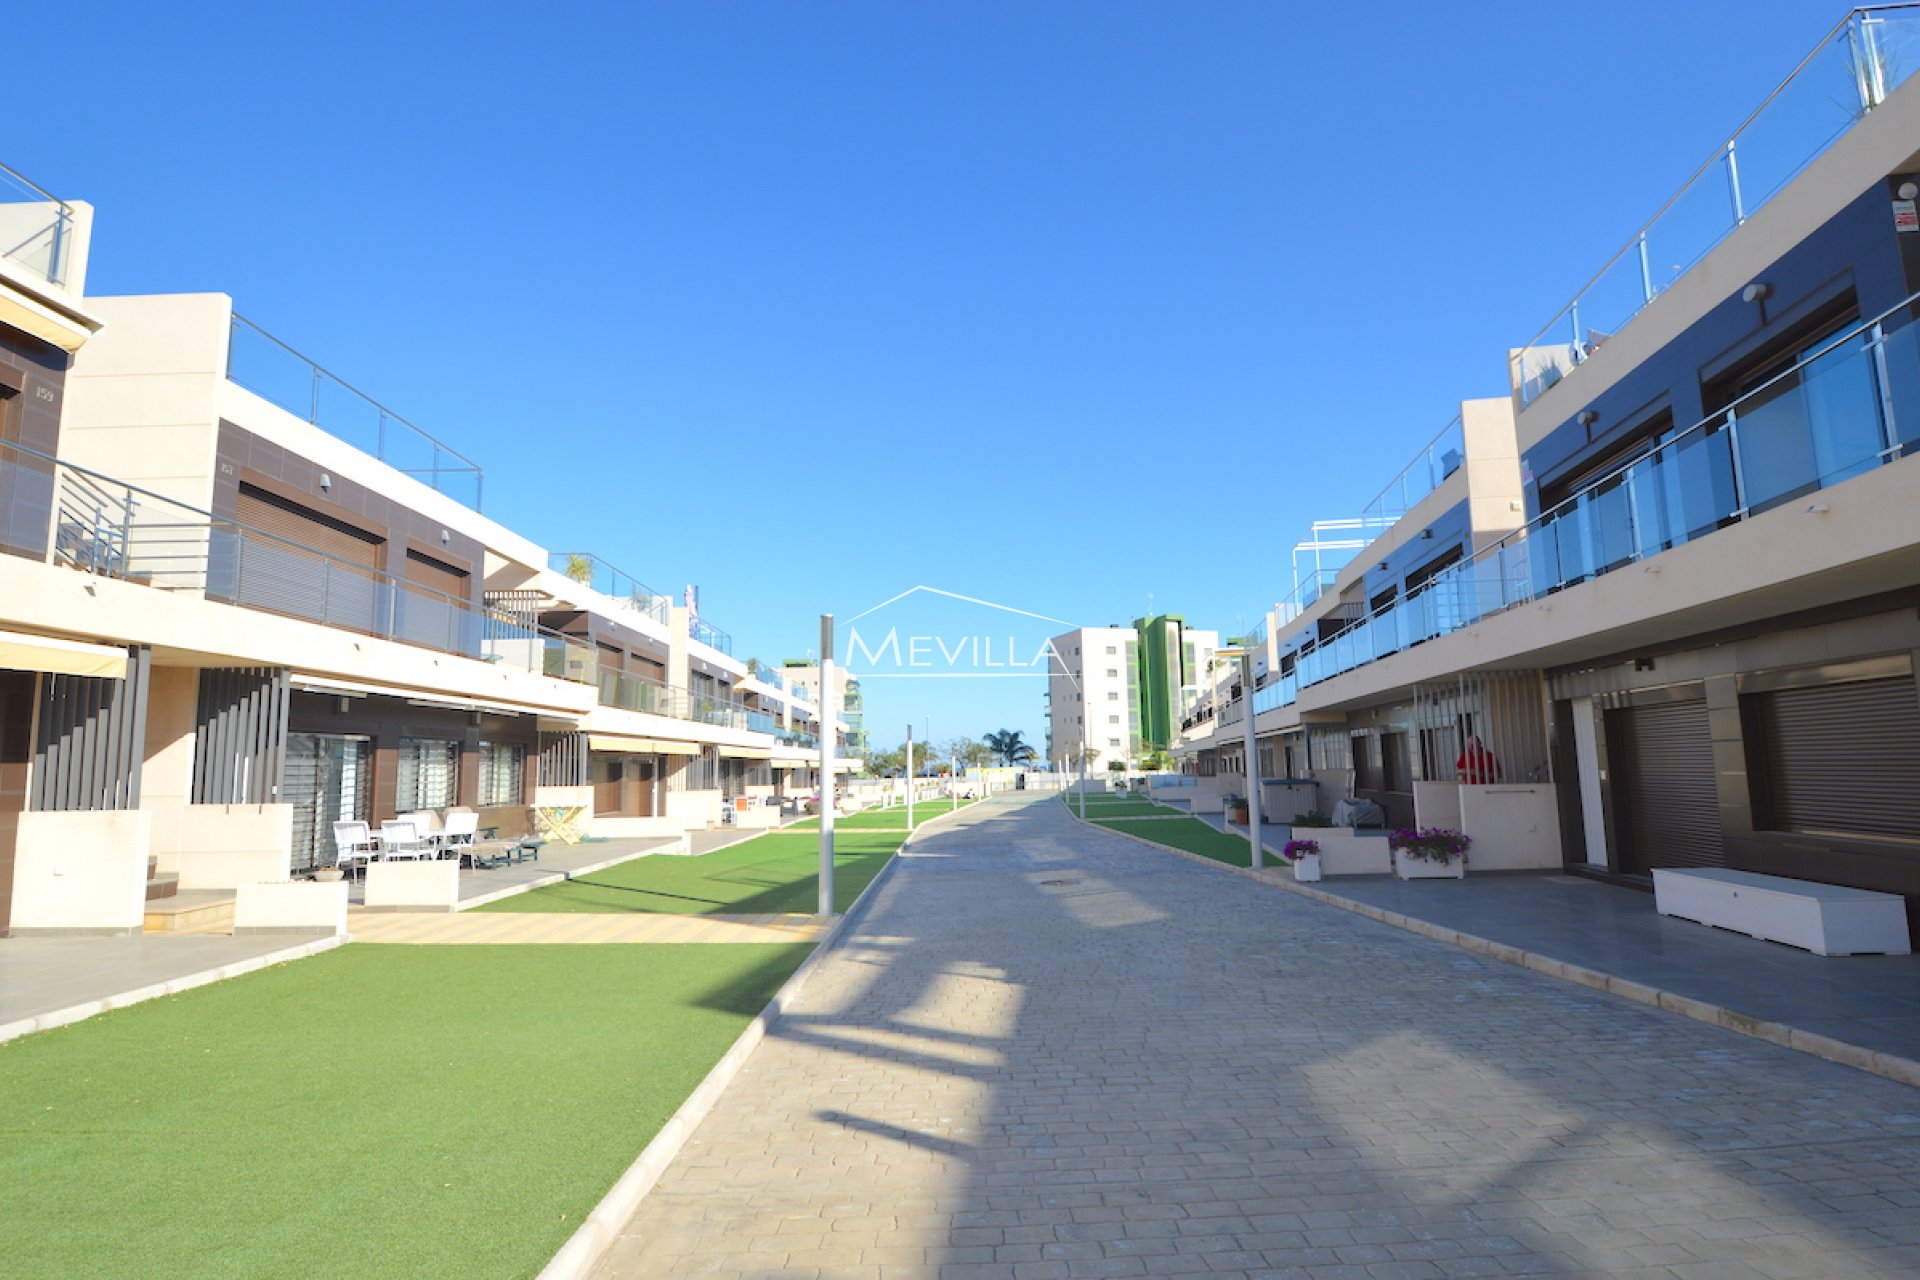 The residencial complex